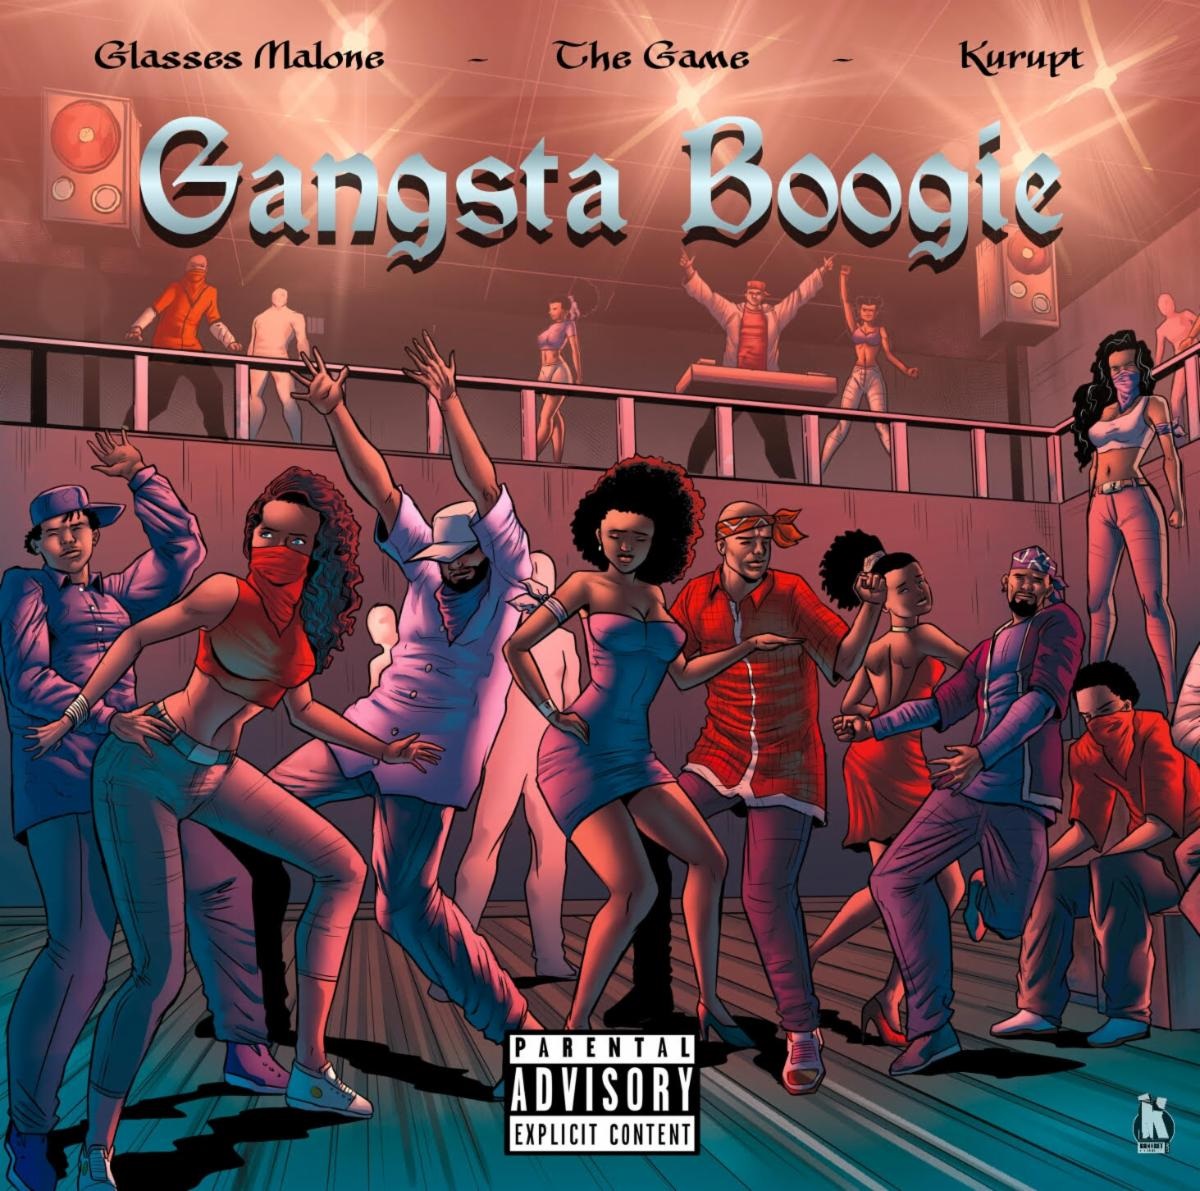 Glasses Malone releases new single, Gangsta Boogie